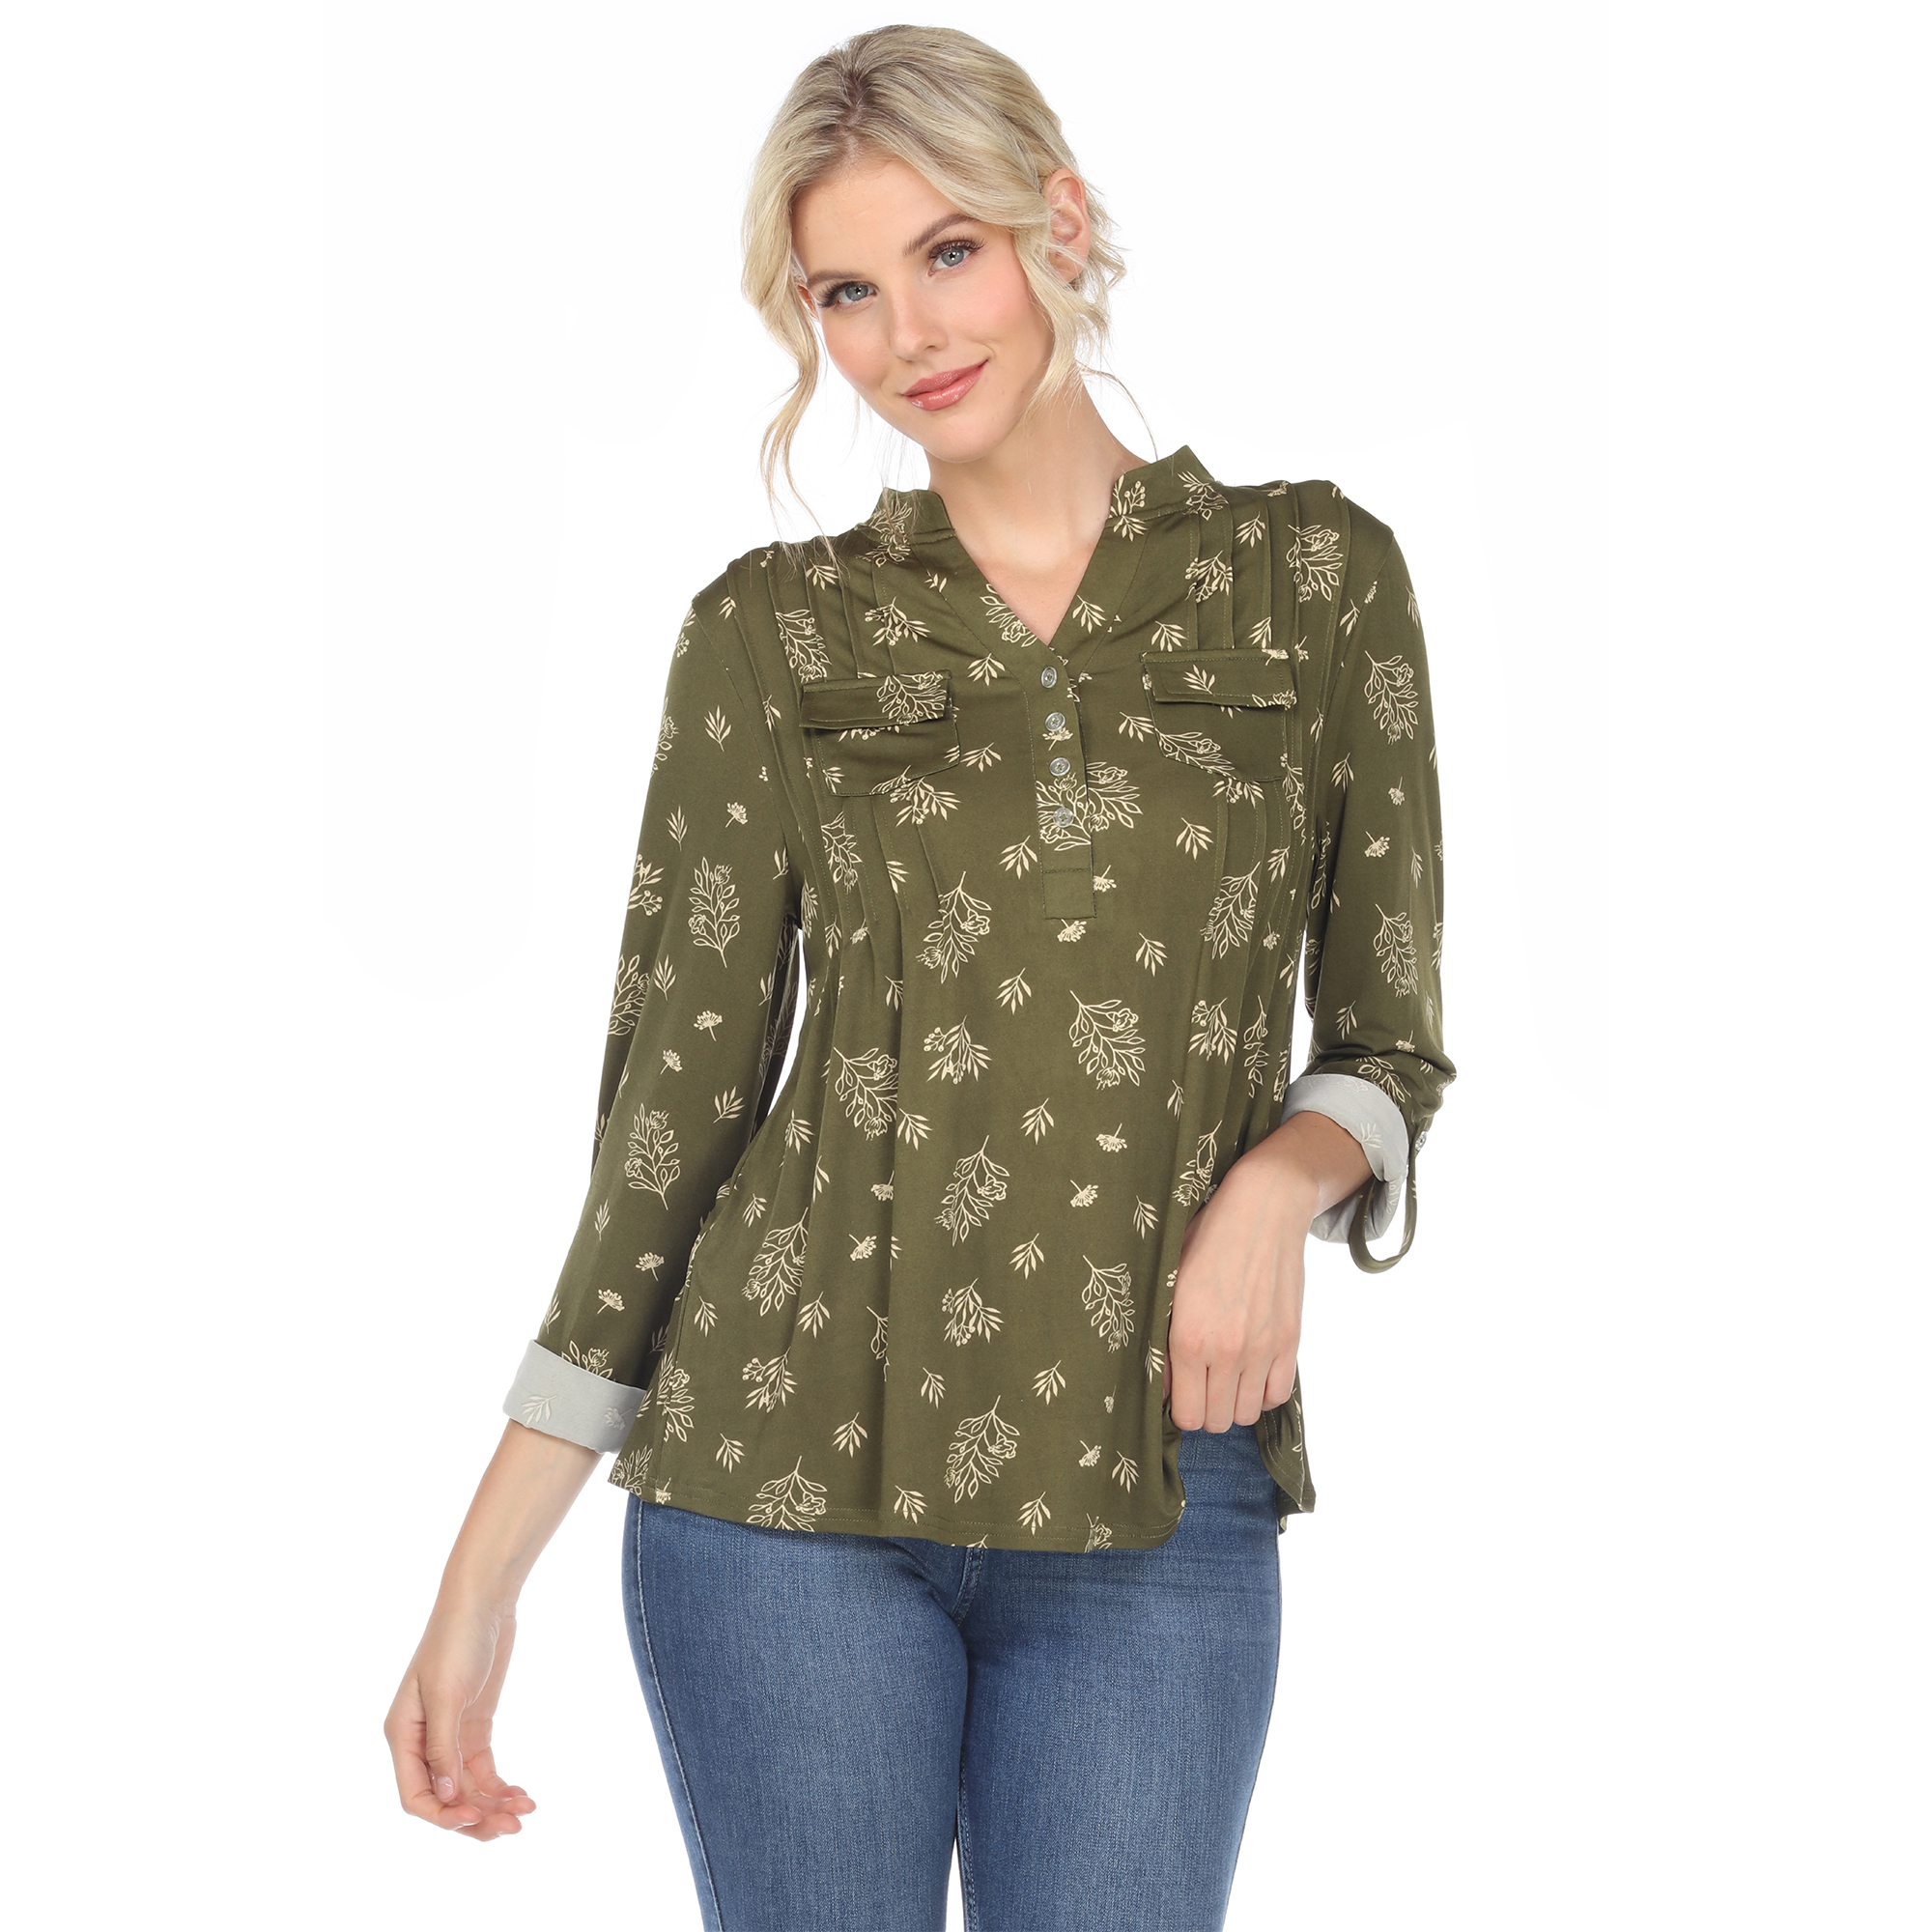 White Mark Women's Pleated Long Sleeve Leaf Print Blouse - Olive, Small